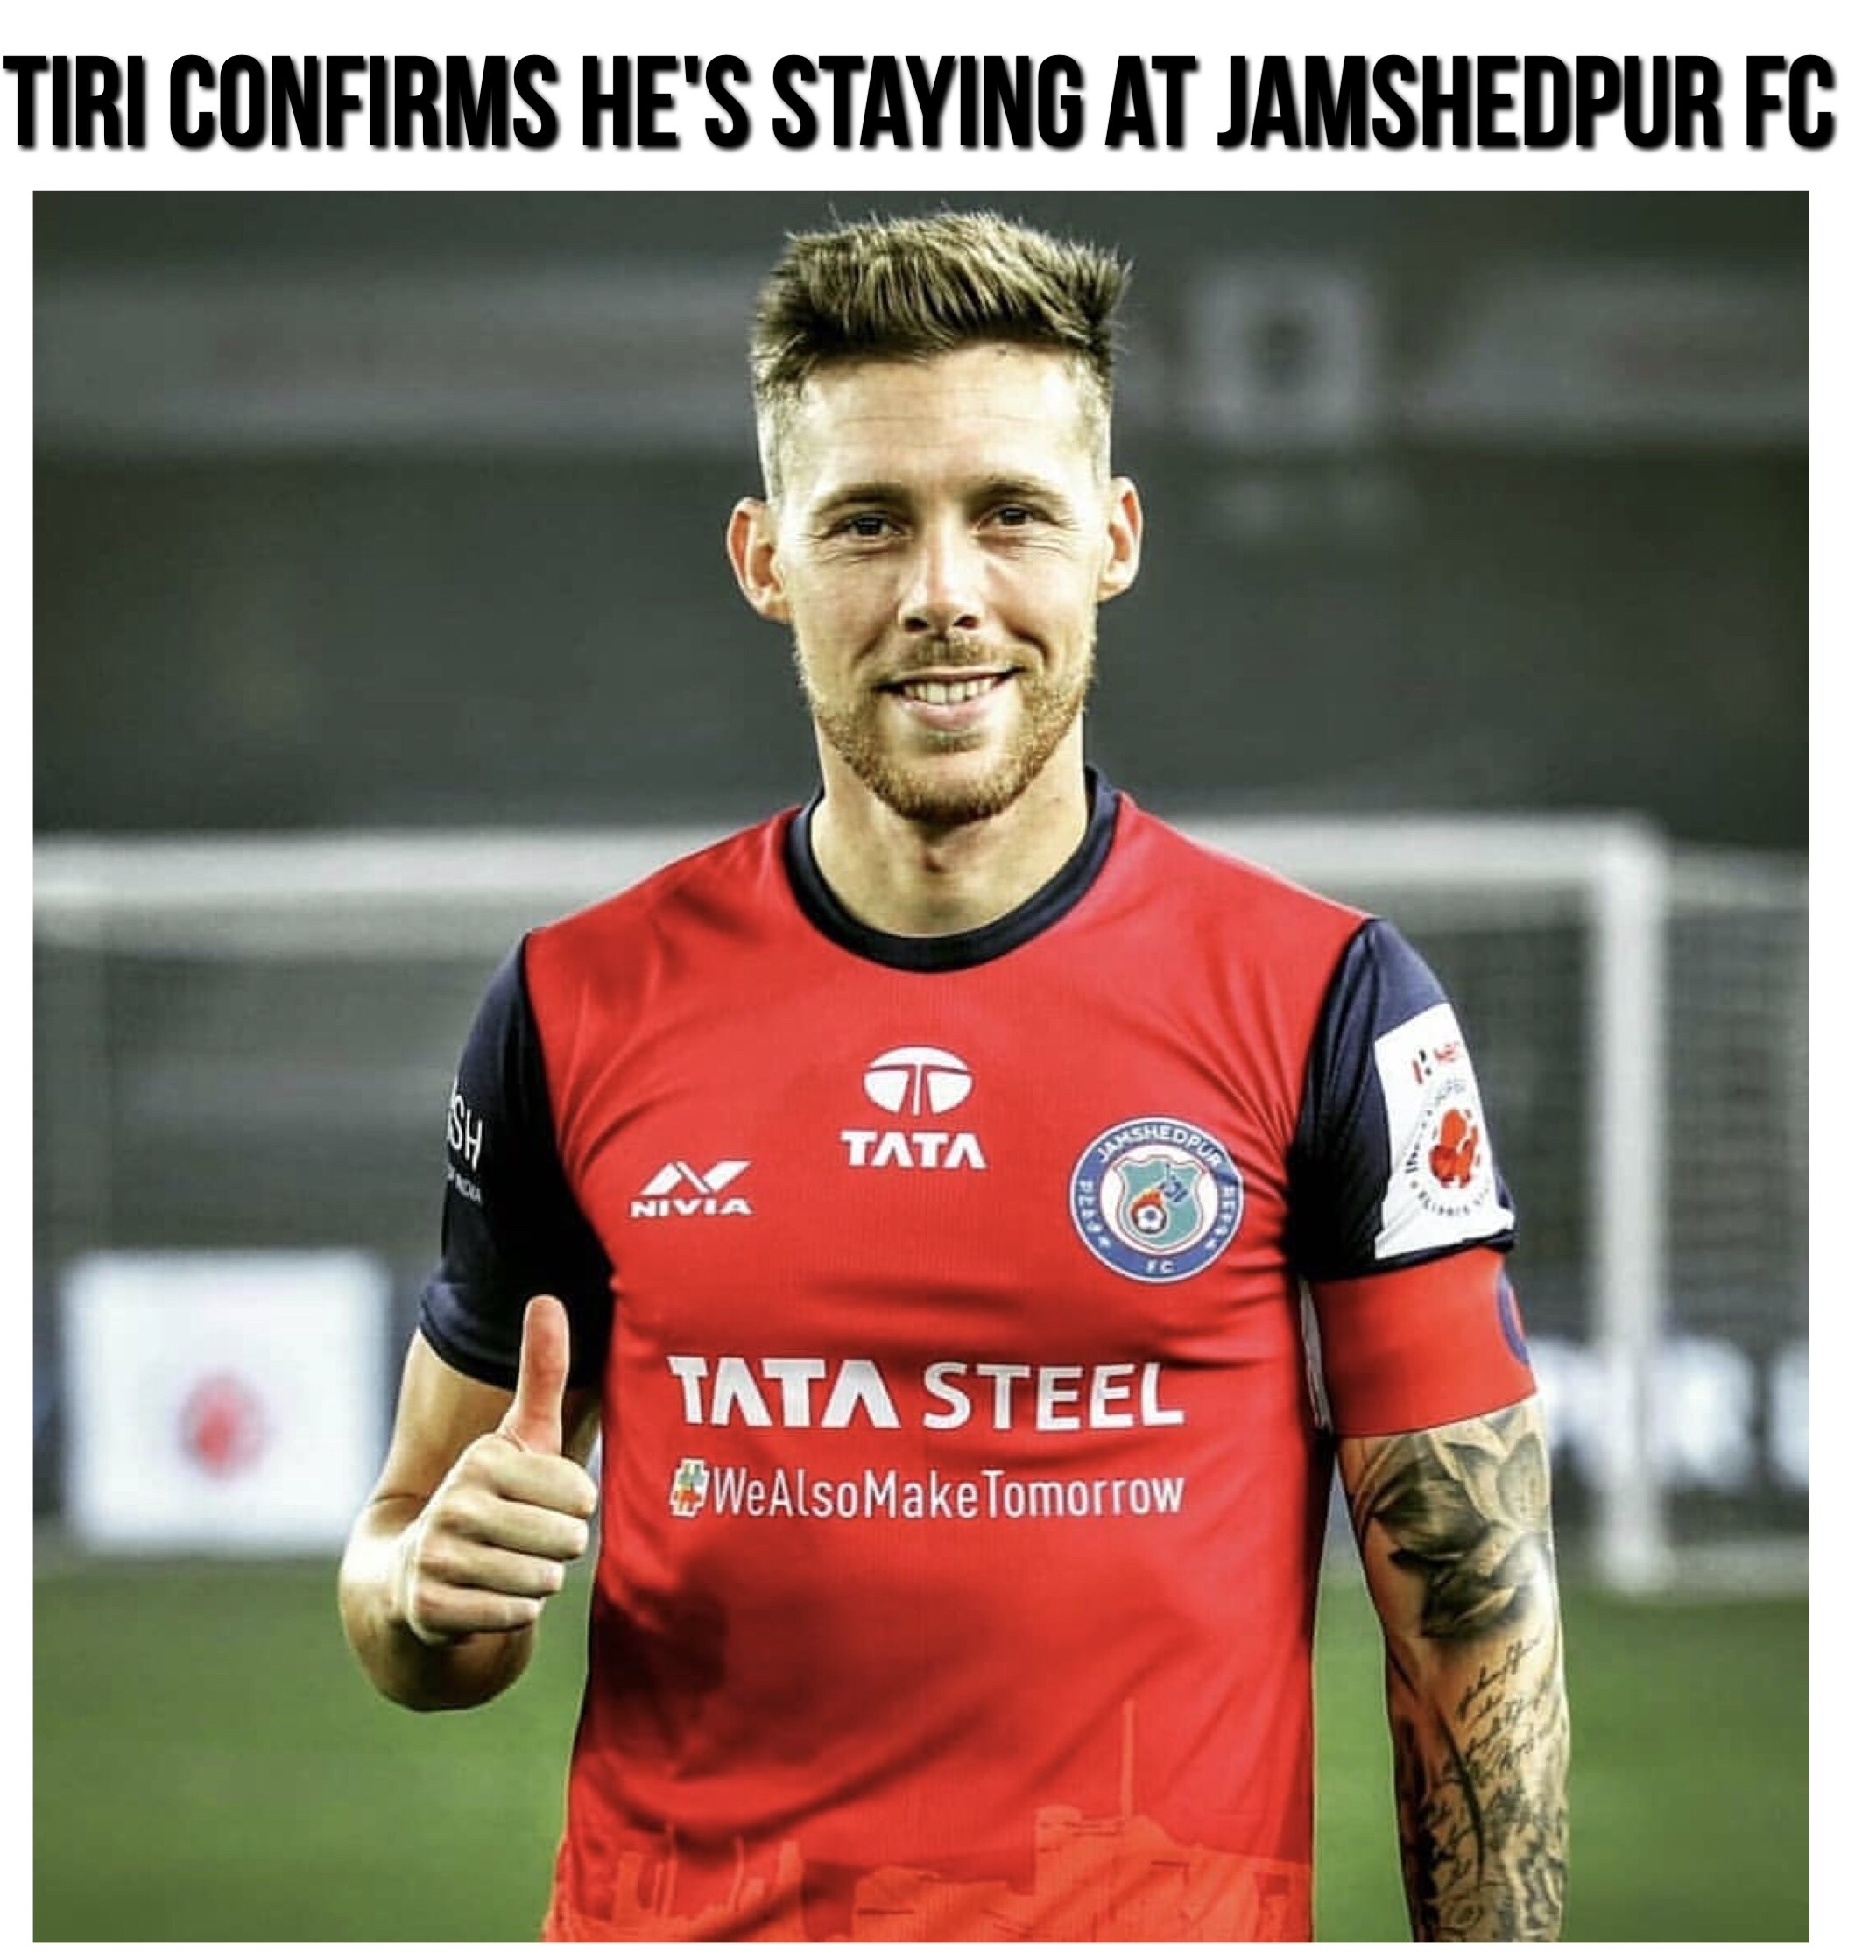 Tiri hemself conform that he will stay at Jamshedpur fc for one more season. img 9241